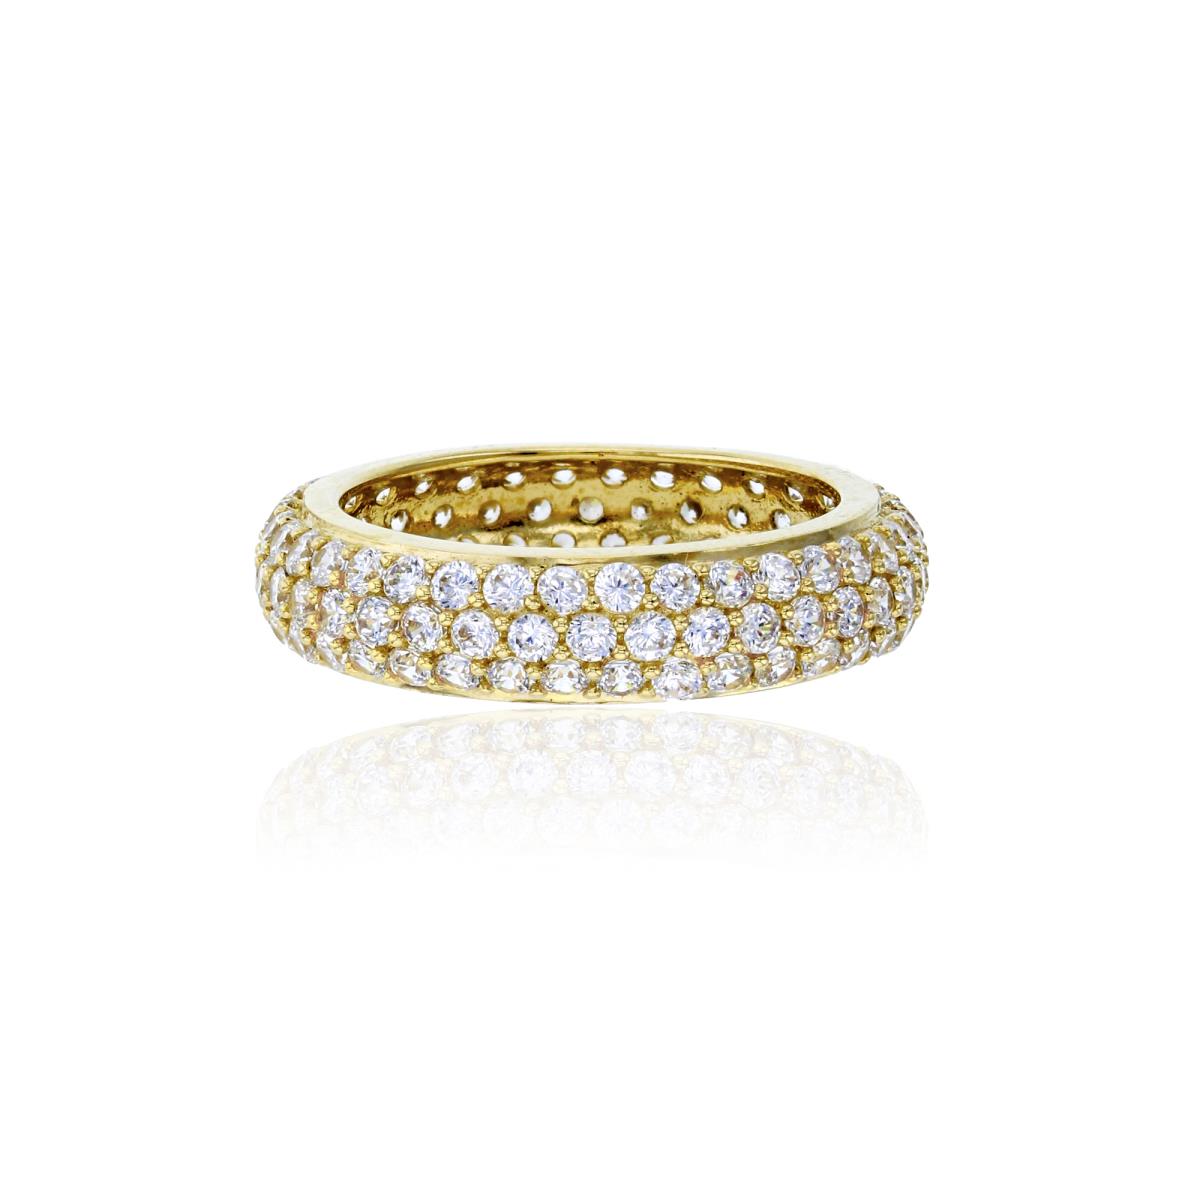 14K Yellow Gold Micropave 3-Row Eternity Ring